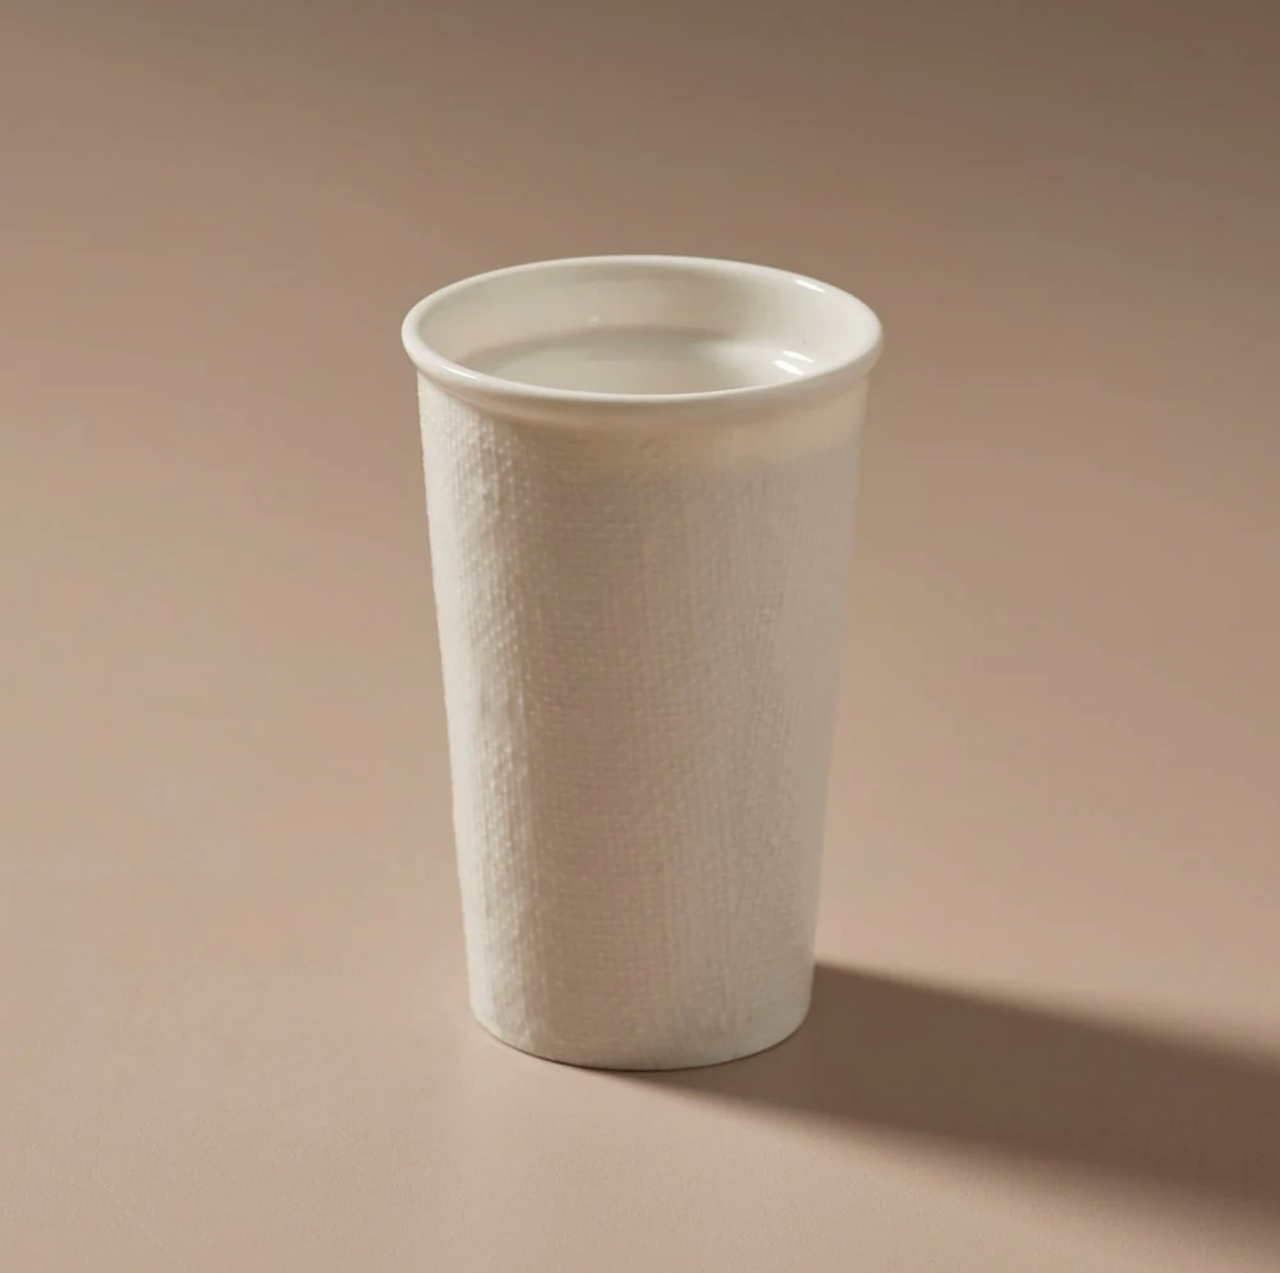 An Indigo Love Keeper Cup - Ceramic - White Linen sitting on a beige surface, featuring a sealable lid.